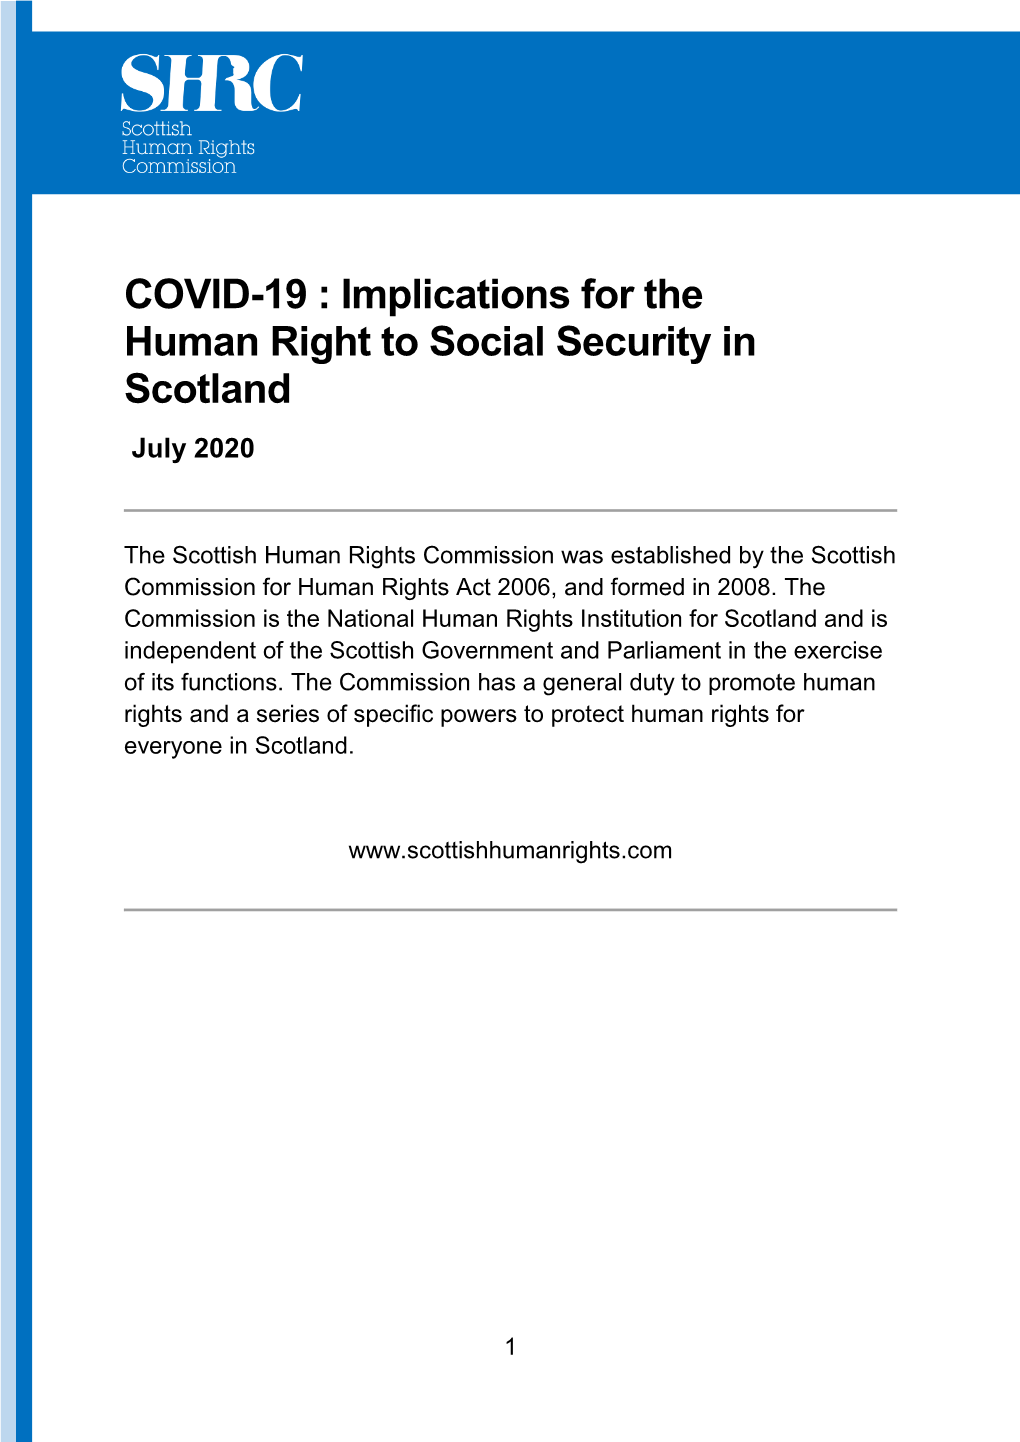 COVID-19 : Implications for the Human Right to Social Security in Scotland July 2020